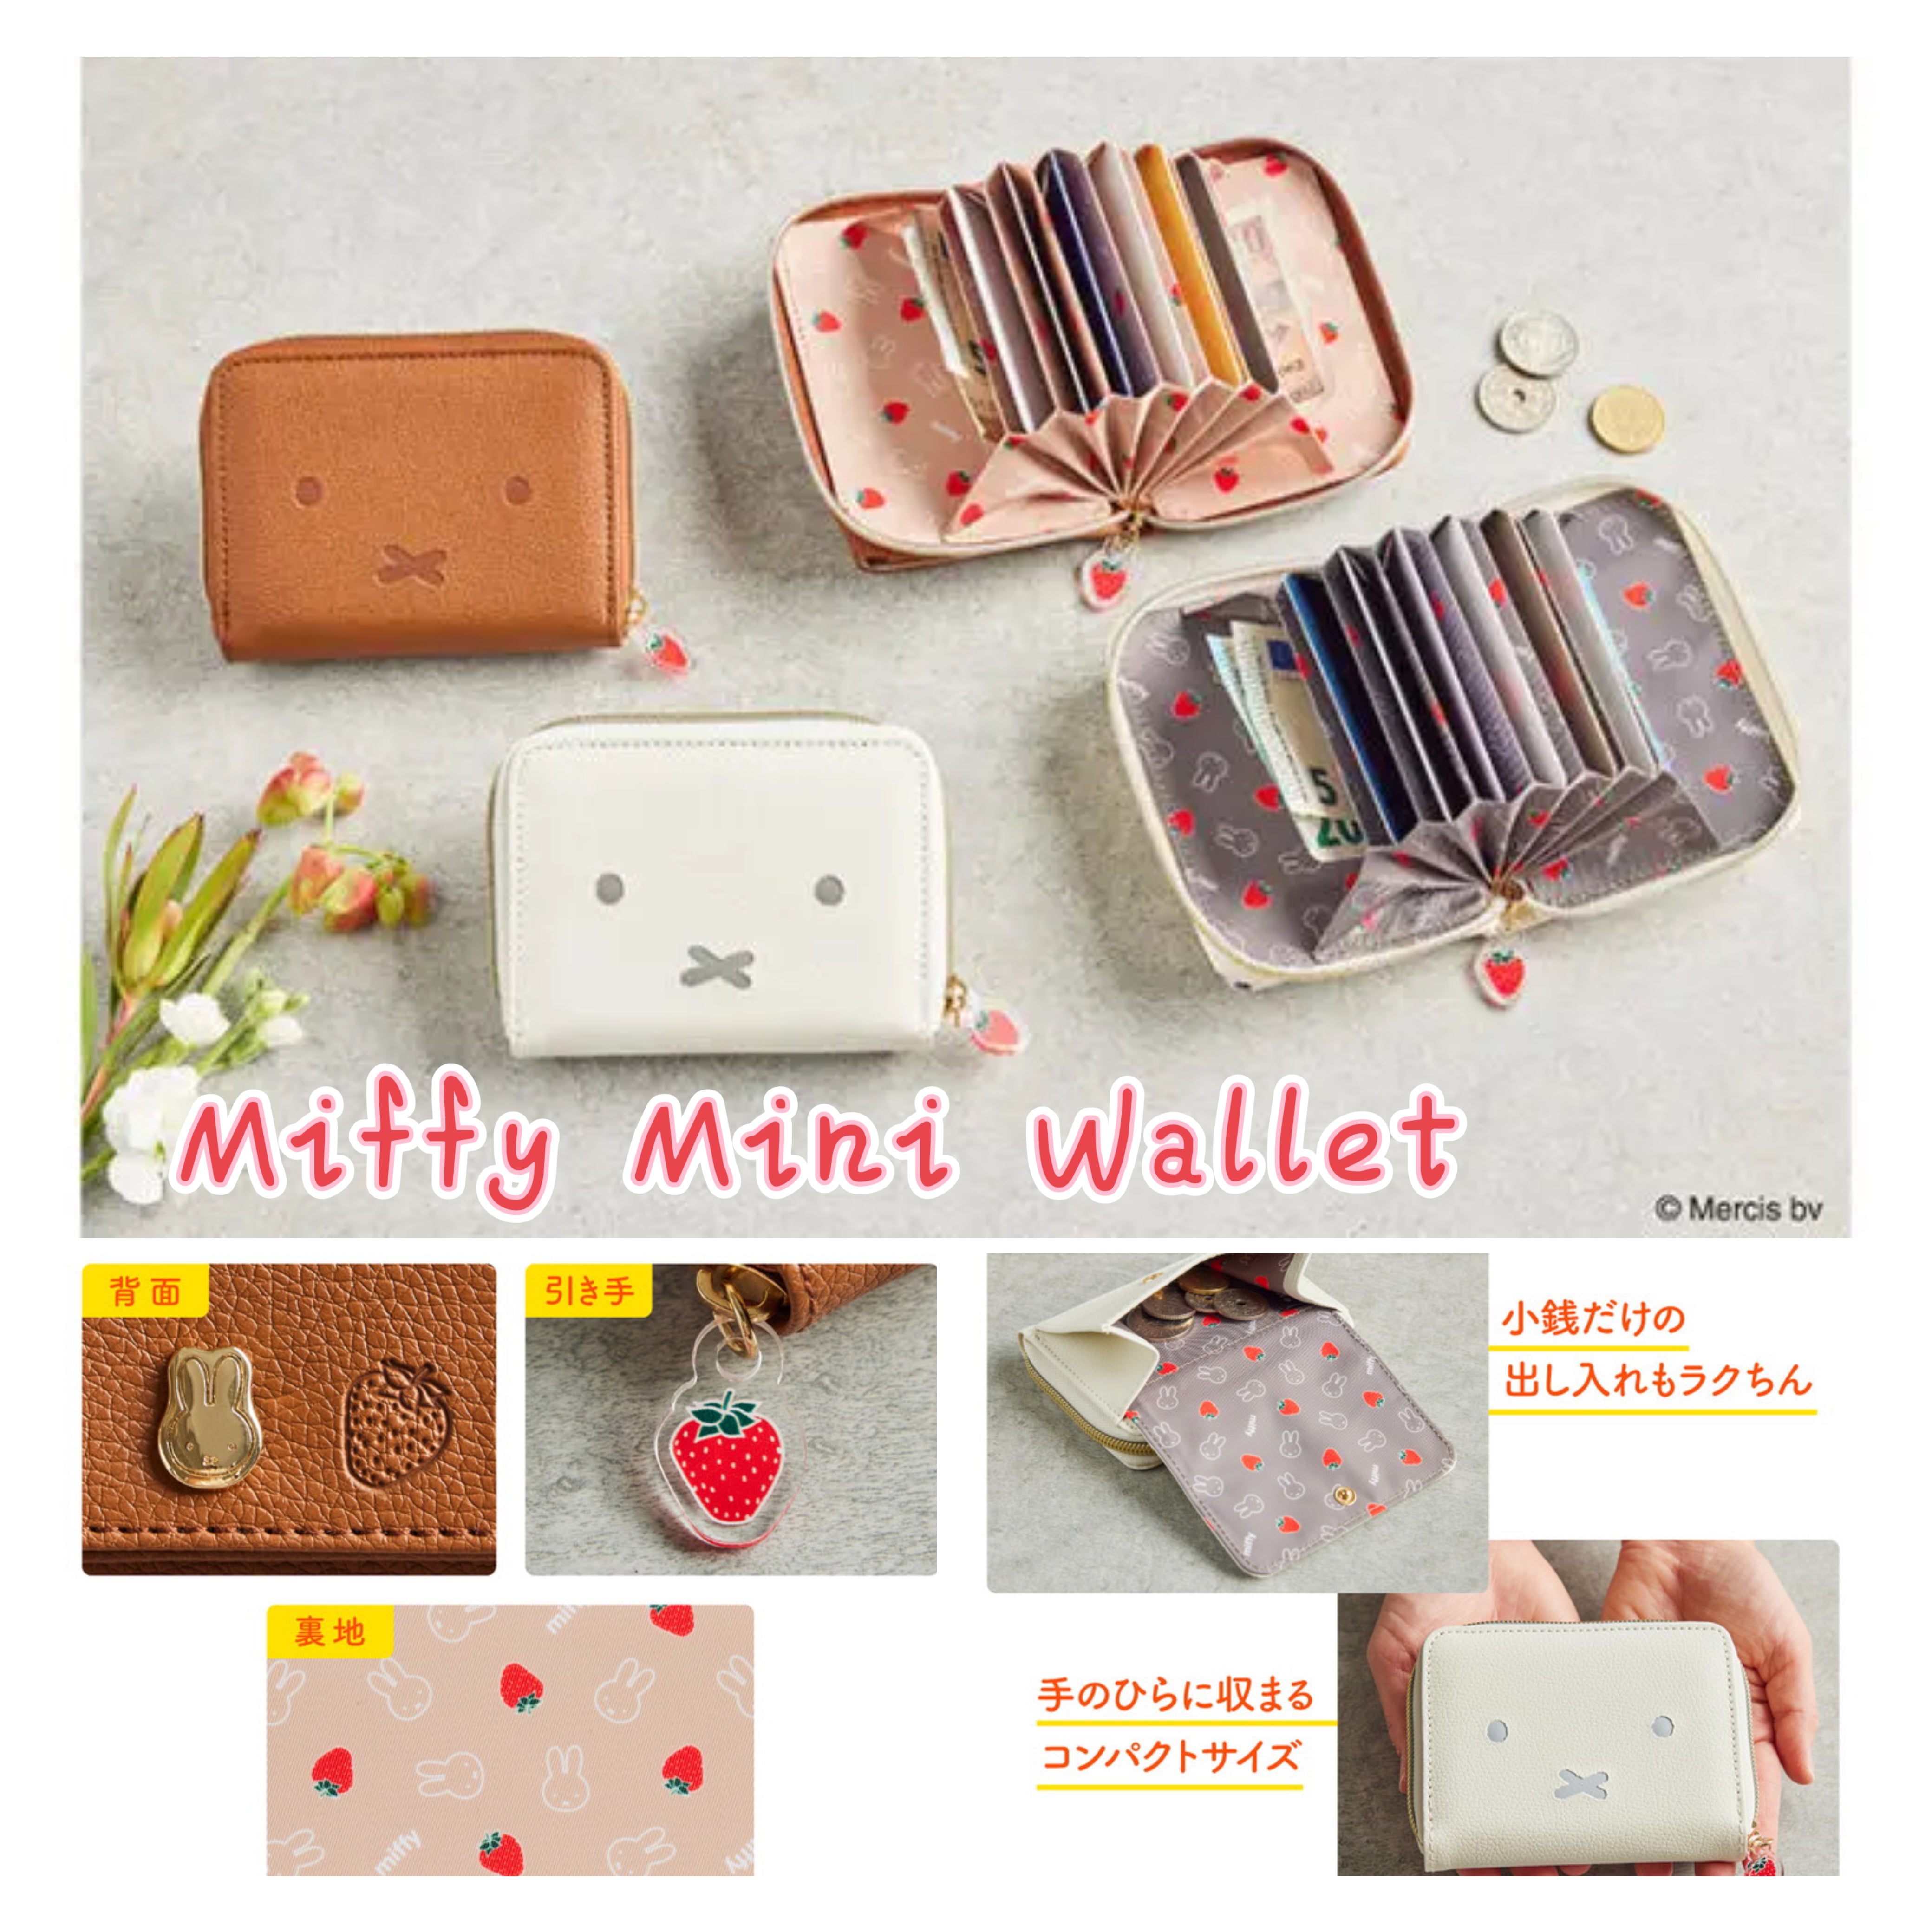 Buy Miffy miffy half wallet / BL compact wallet blue from Japan - Buy  authentic Plus exclusive items from Japan